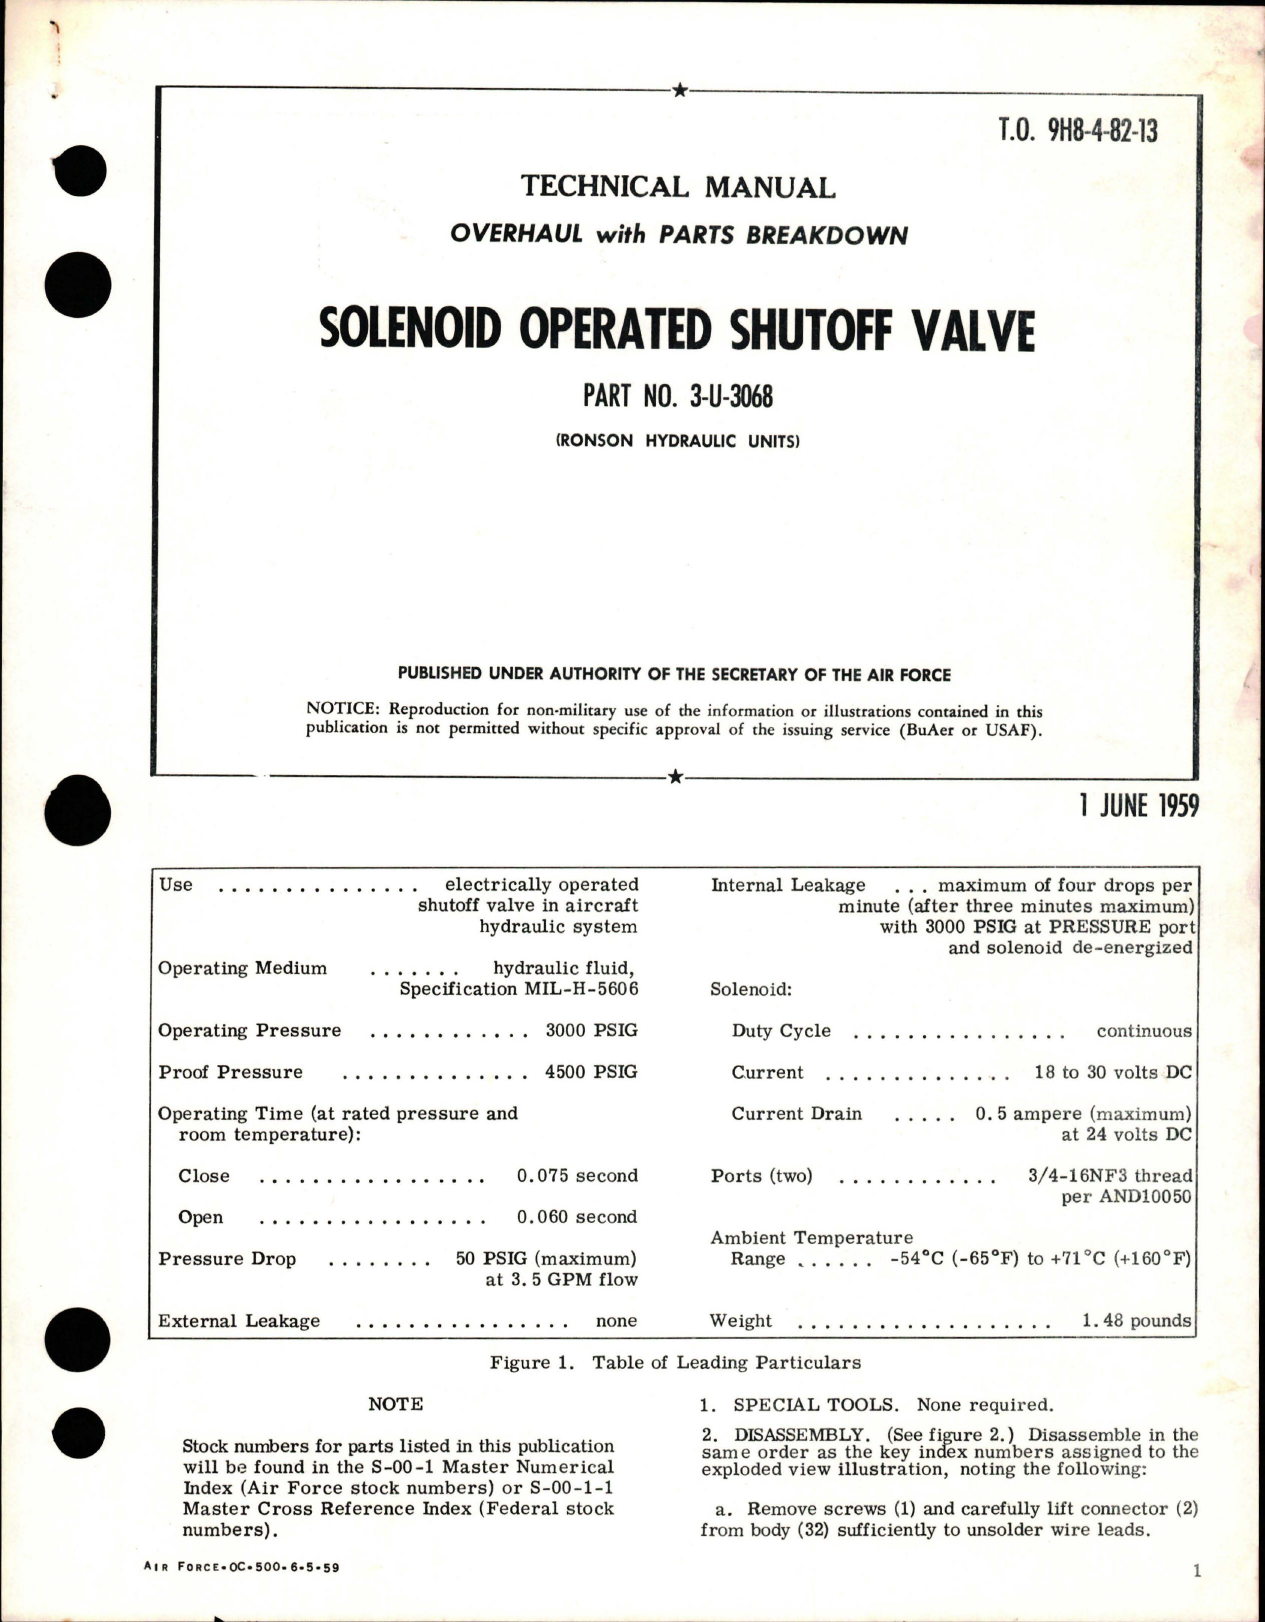 Sample page 1 from AirCorps Library document: Overhaul with Parts Breakdown for Solenoid Operated Shutoff Valve - Part 3-U-3068 